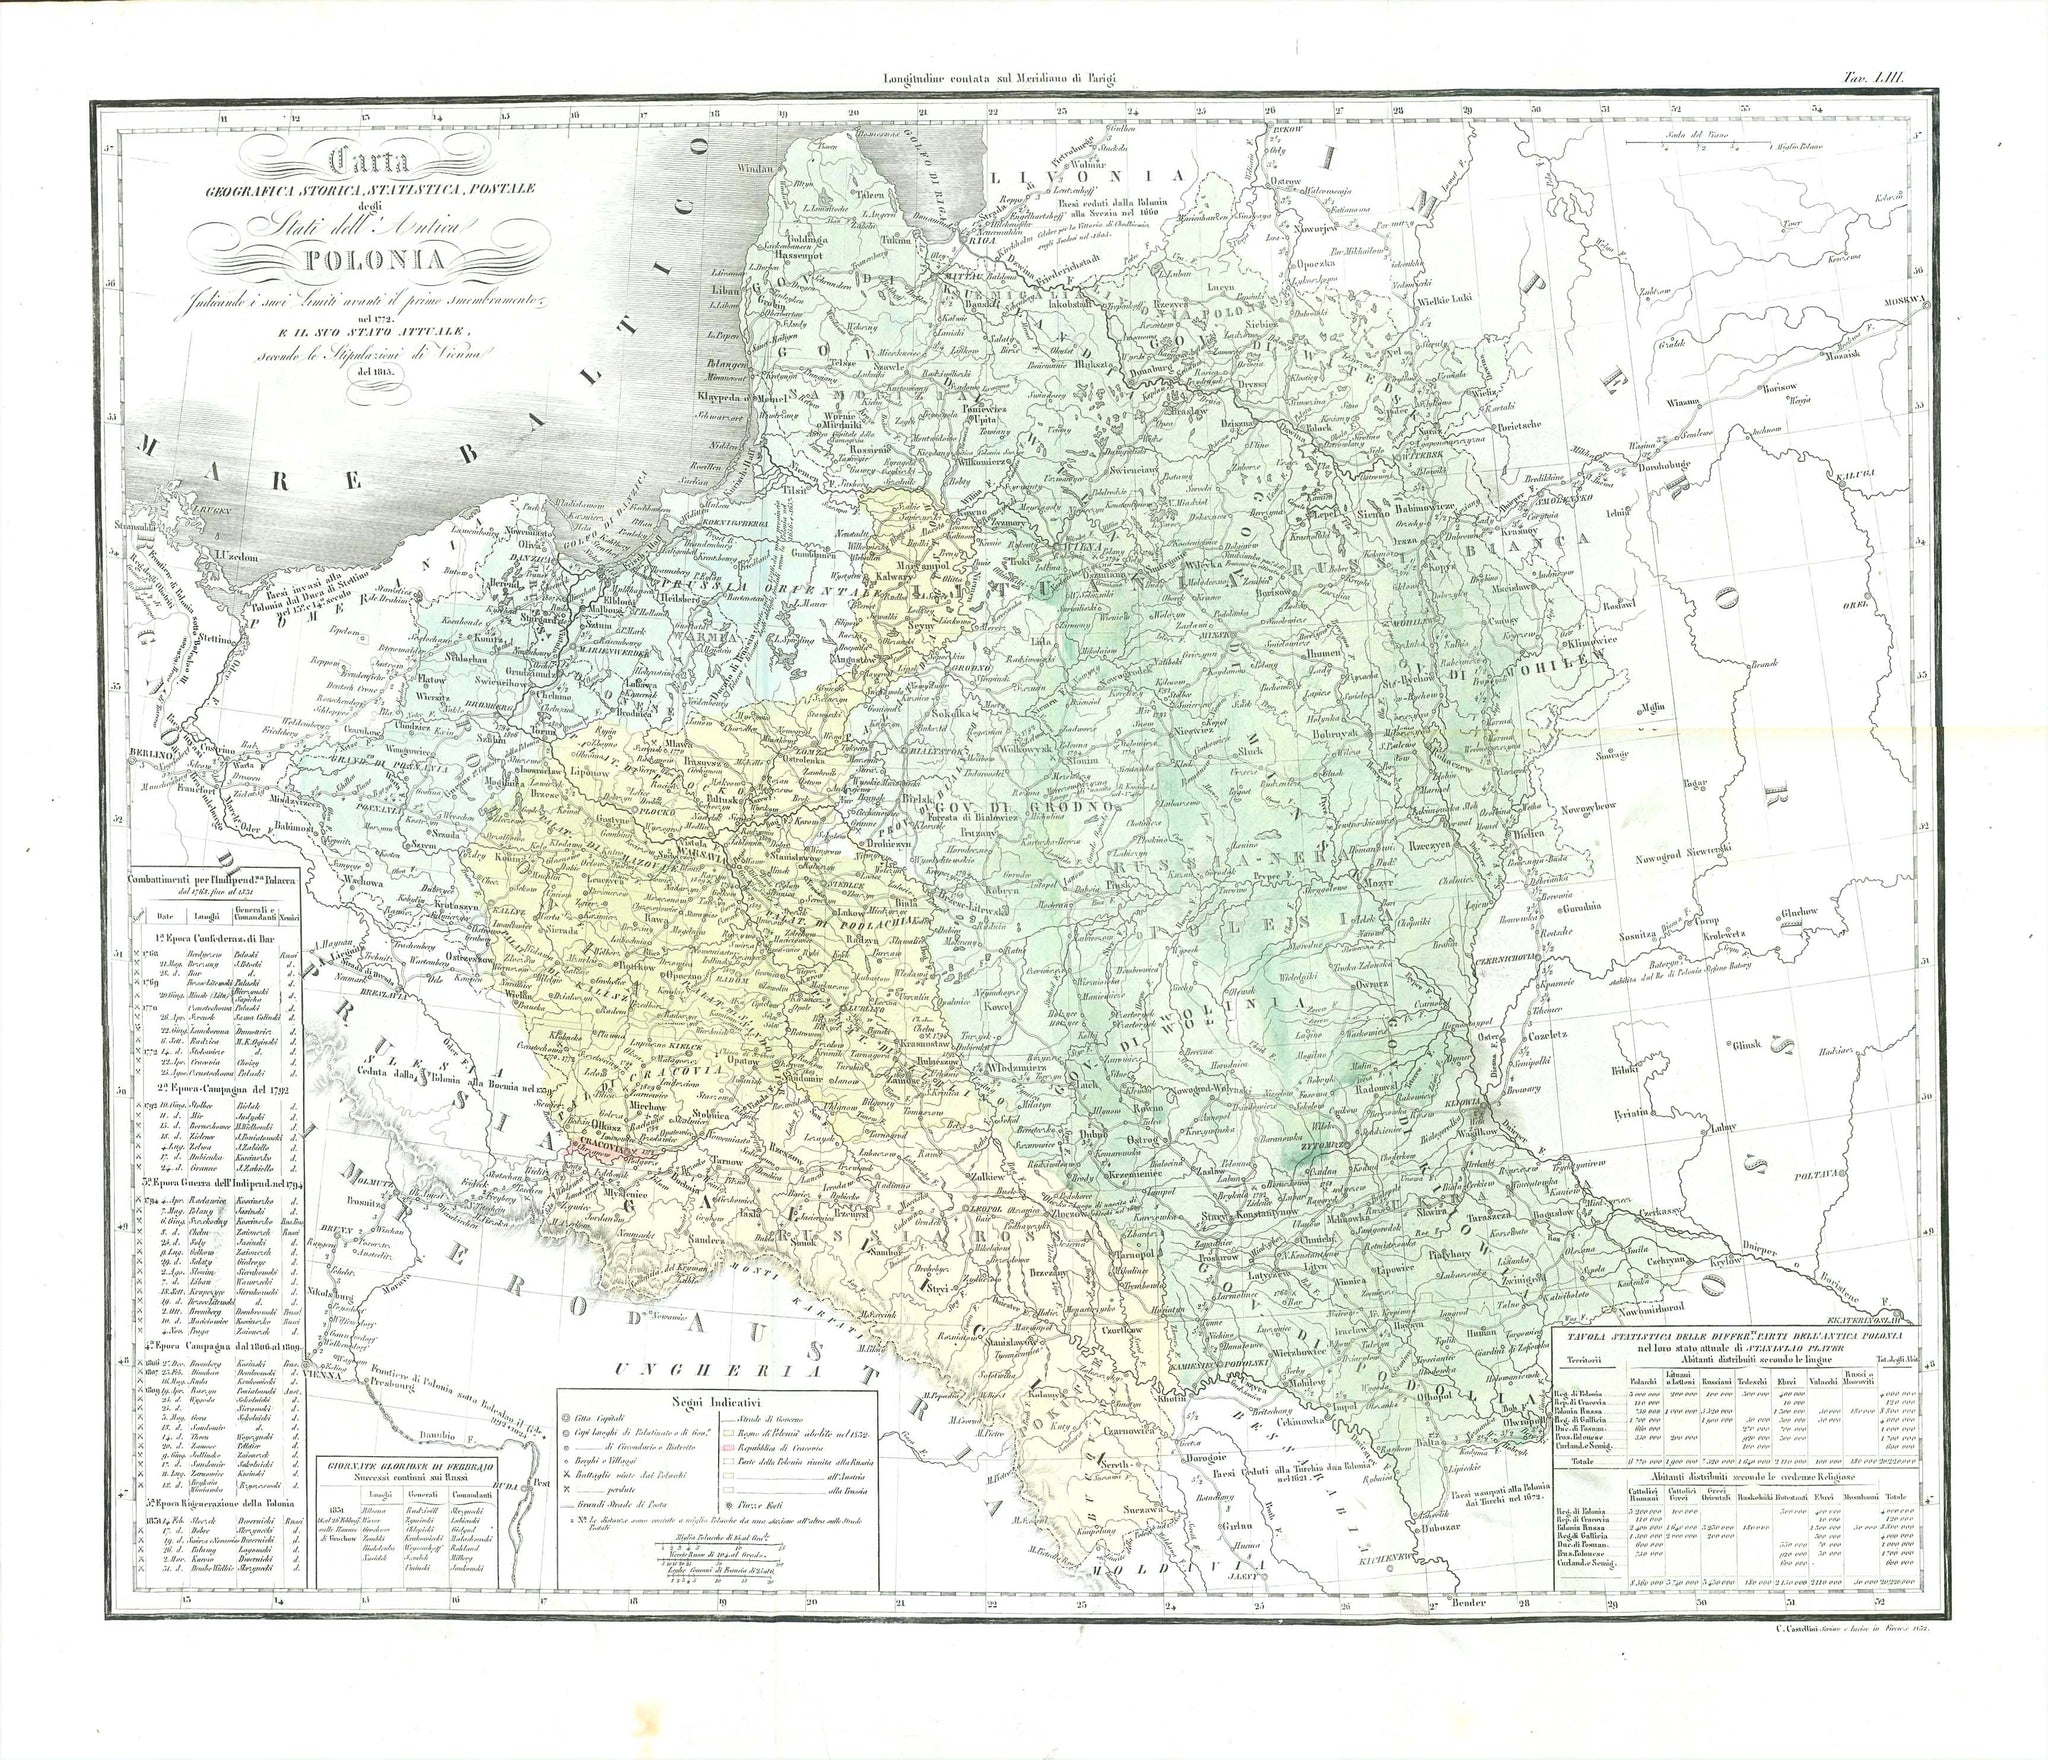 Poland, Carta Geografica, Storica, Statistica, Postale degli Stati dell'Antica Polonia Indicando. Hand-colored copper etching showing Great Poland in its defines BEFORE the First Partition of Poland in 1772.  Diverse hand coloring mark the political status. With several legends lower left and right corners. Author. Francesco Constantino Marmocchi (1805-1858)  Florence, 1840